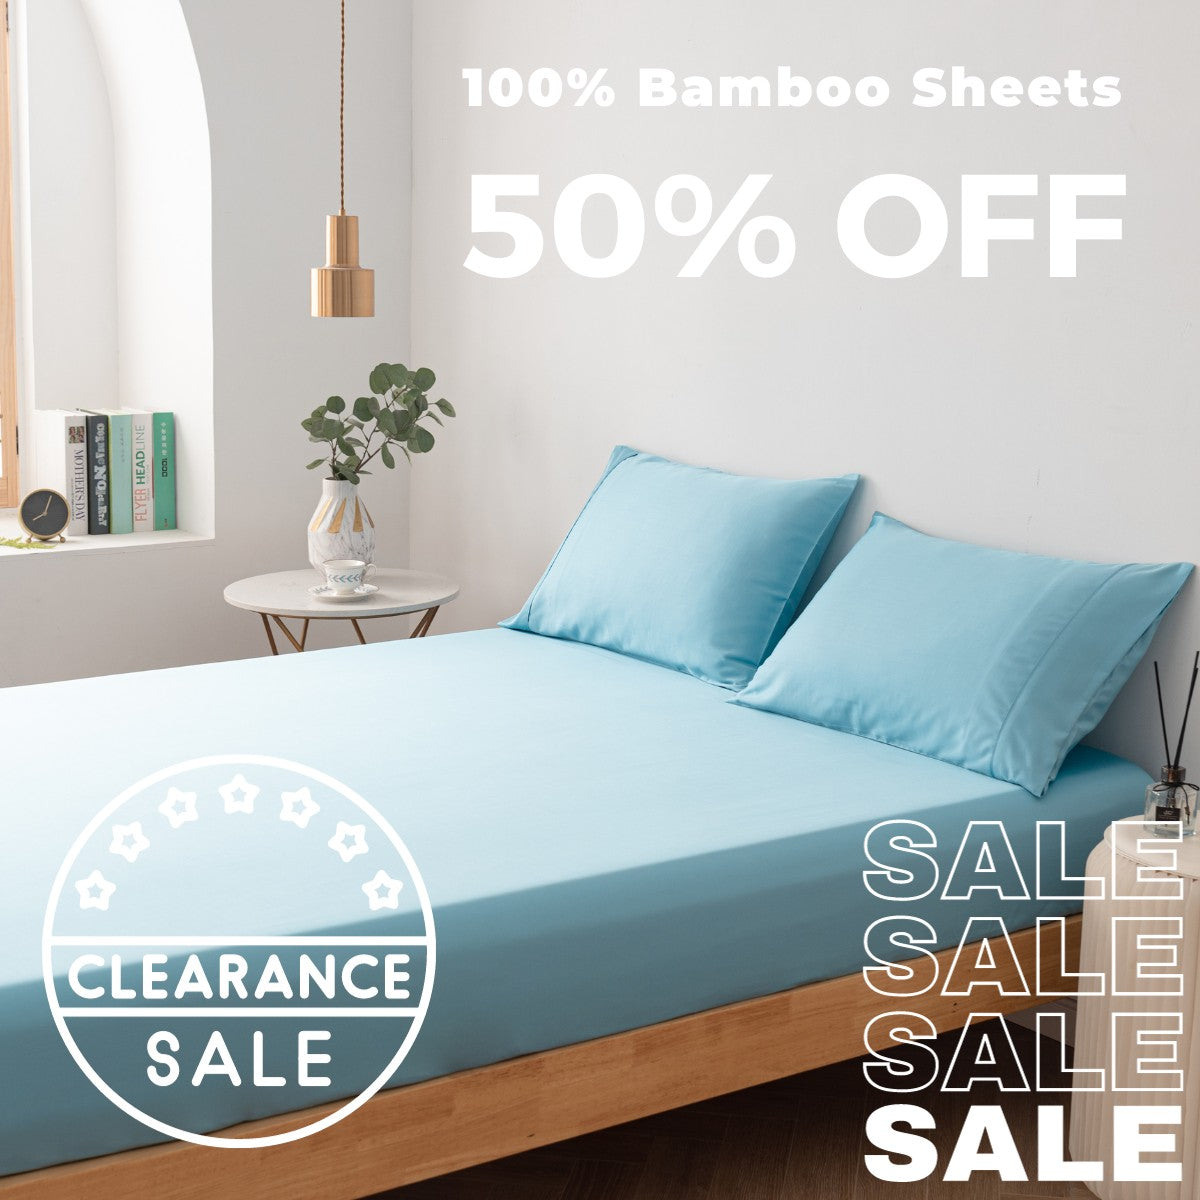 Upgrade your sleep with eco-friendly comfort: shop our clearance sale for 100% bamboo sheets at 50% off!.